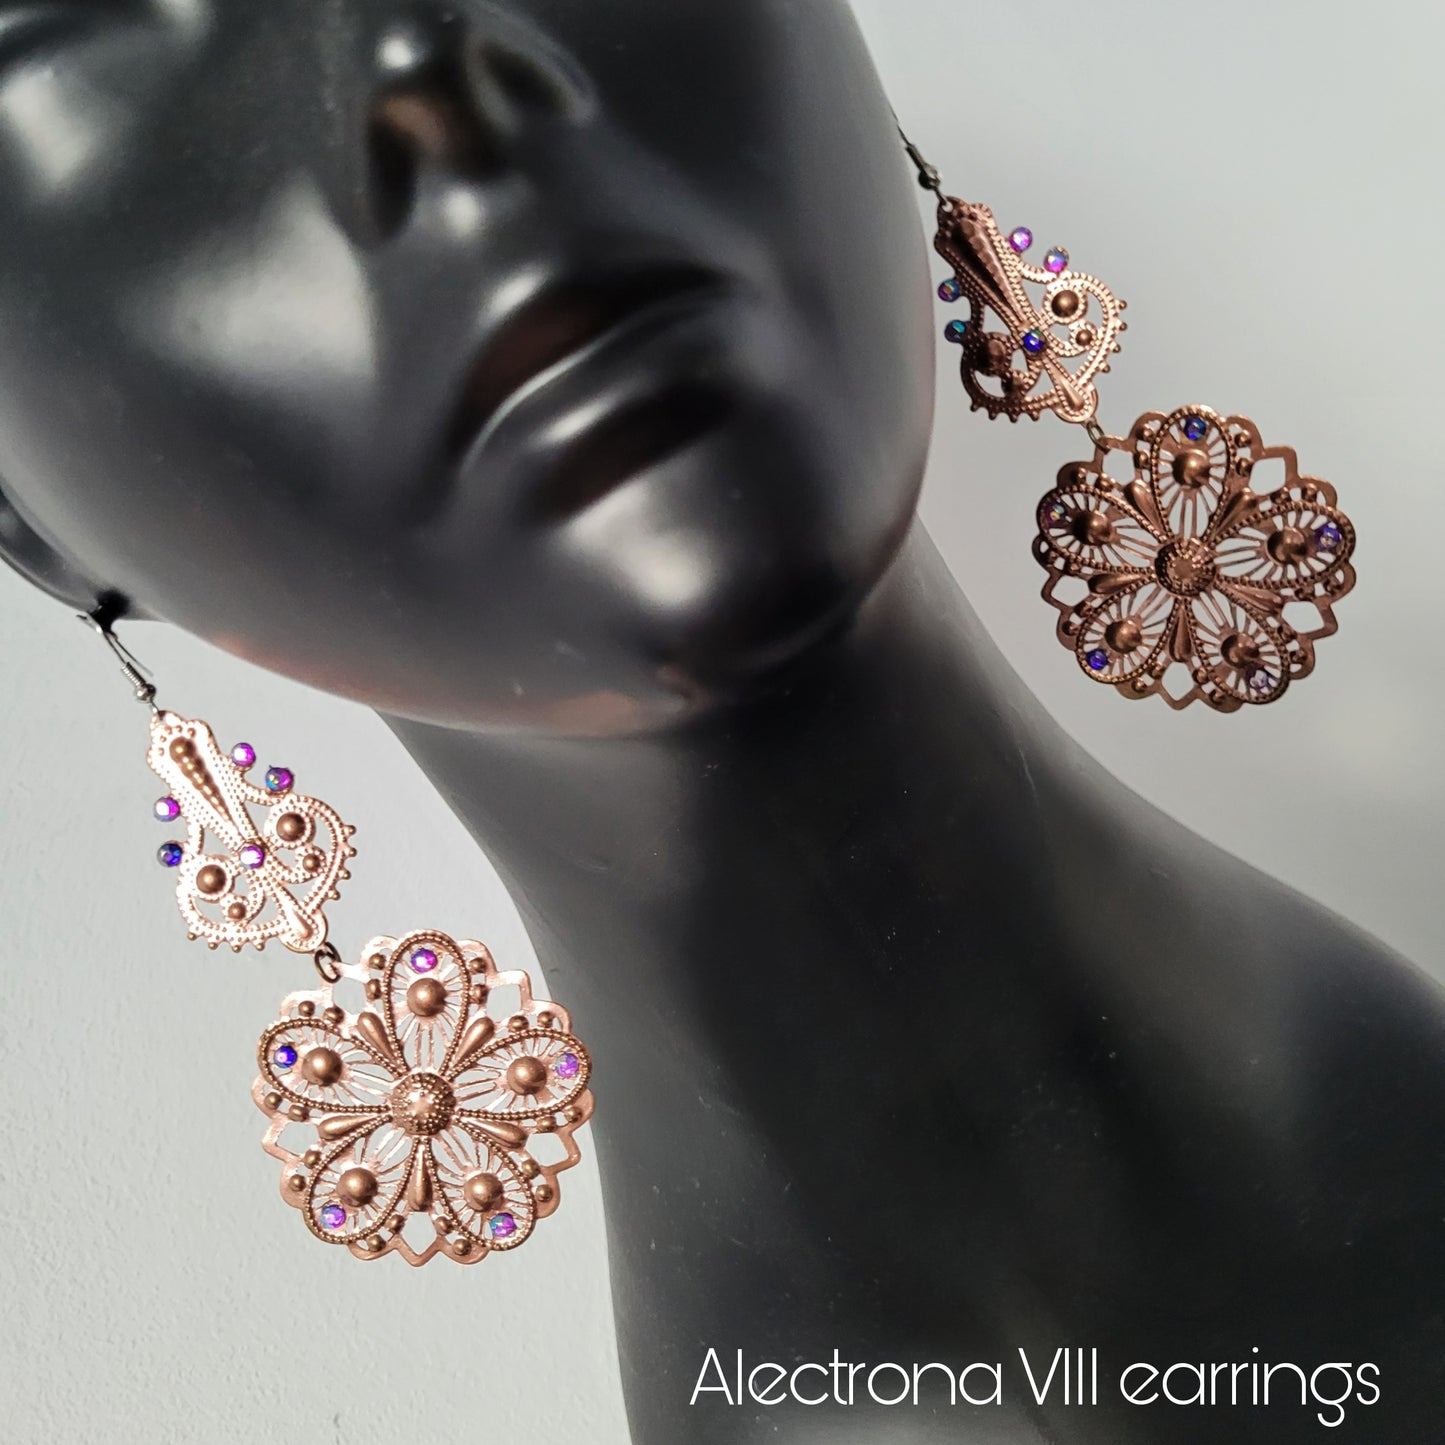 Deusa ex Machina collection: The Alectrona earrings (hook versions)